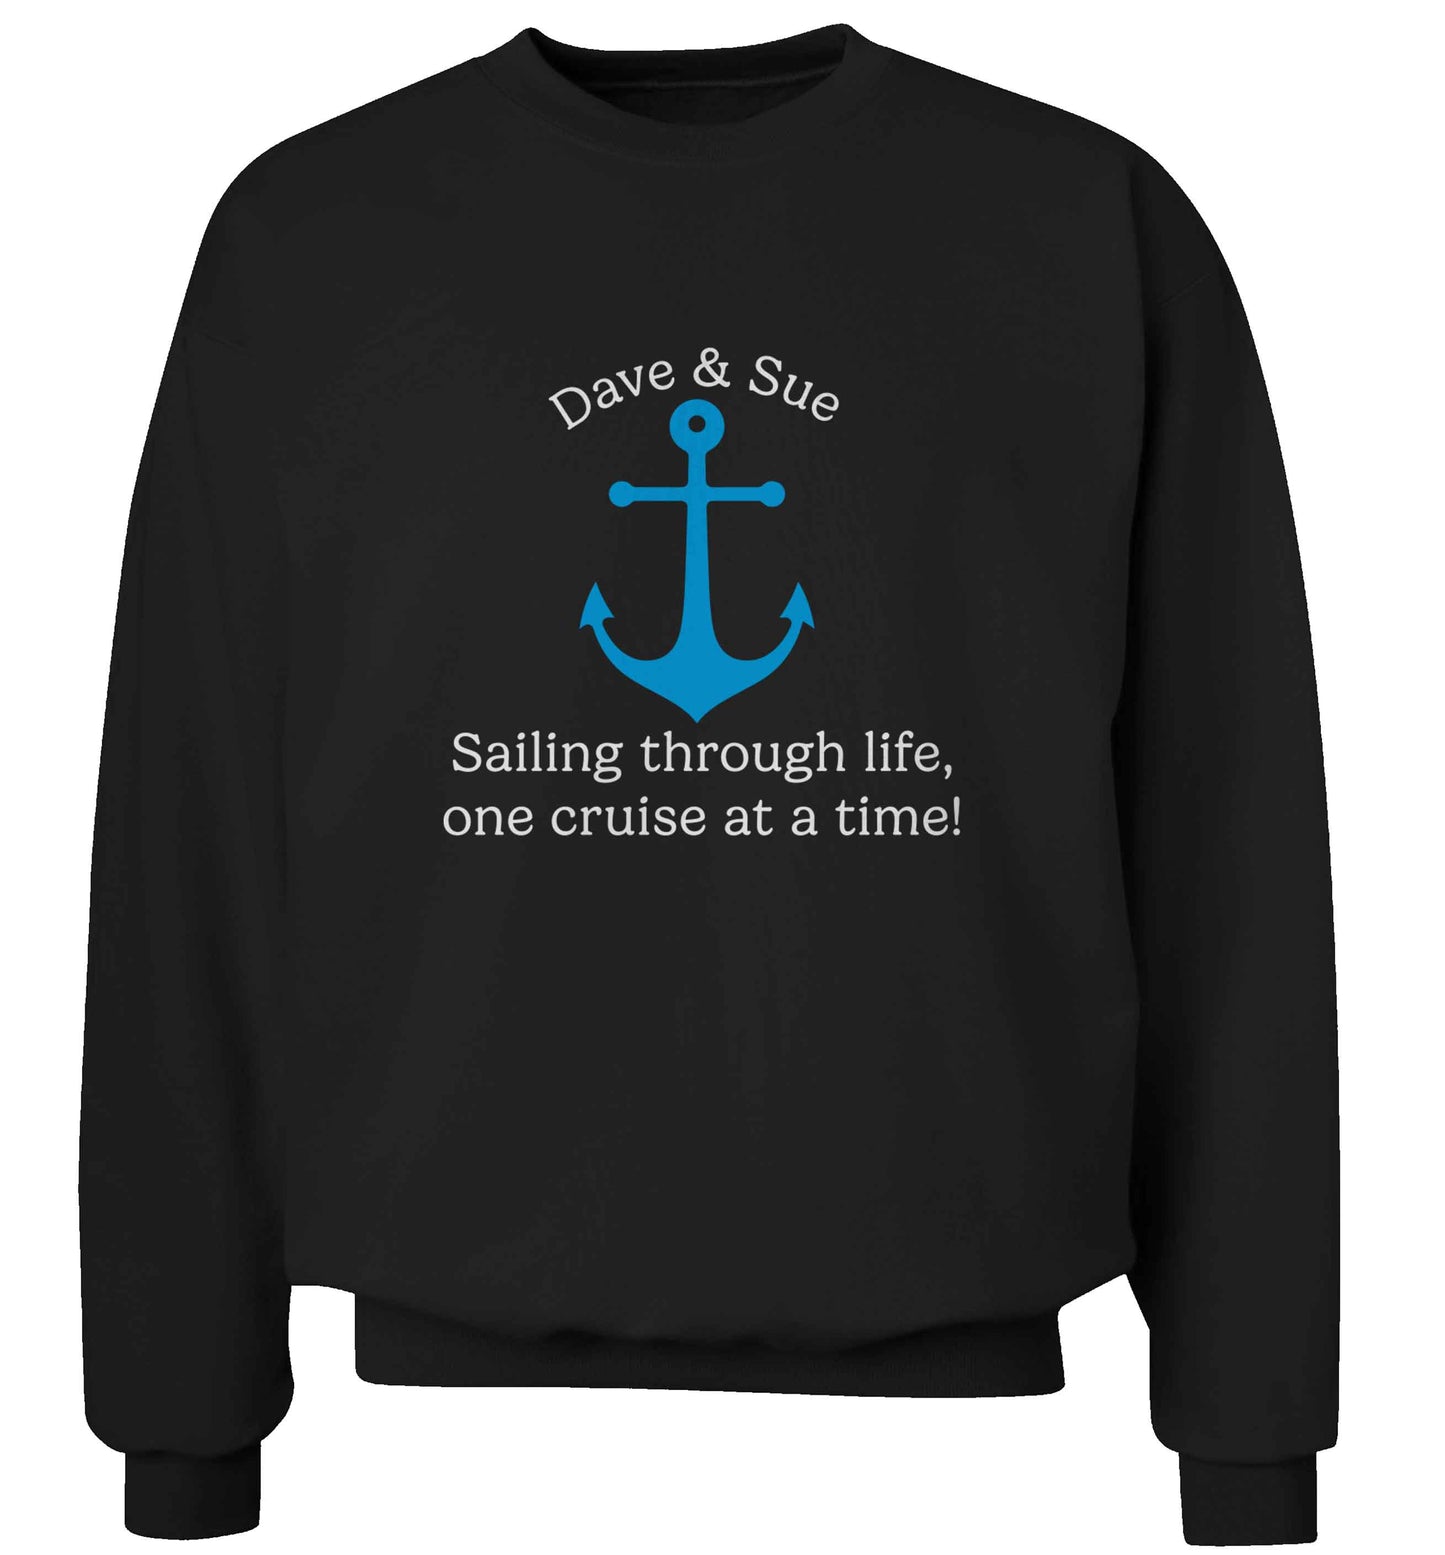 Sailing through life one cruise at a time - personalised adult's unisex black sweater 2XL